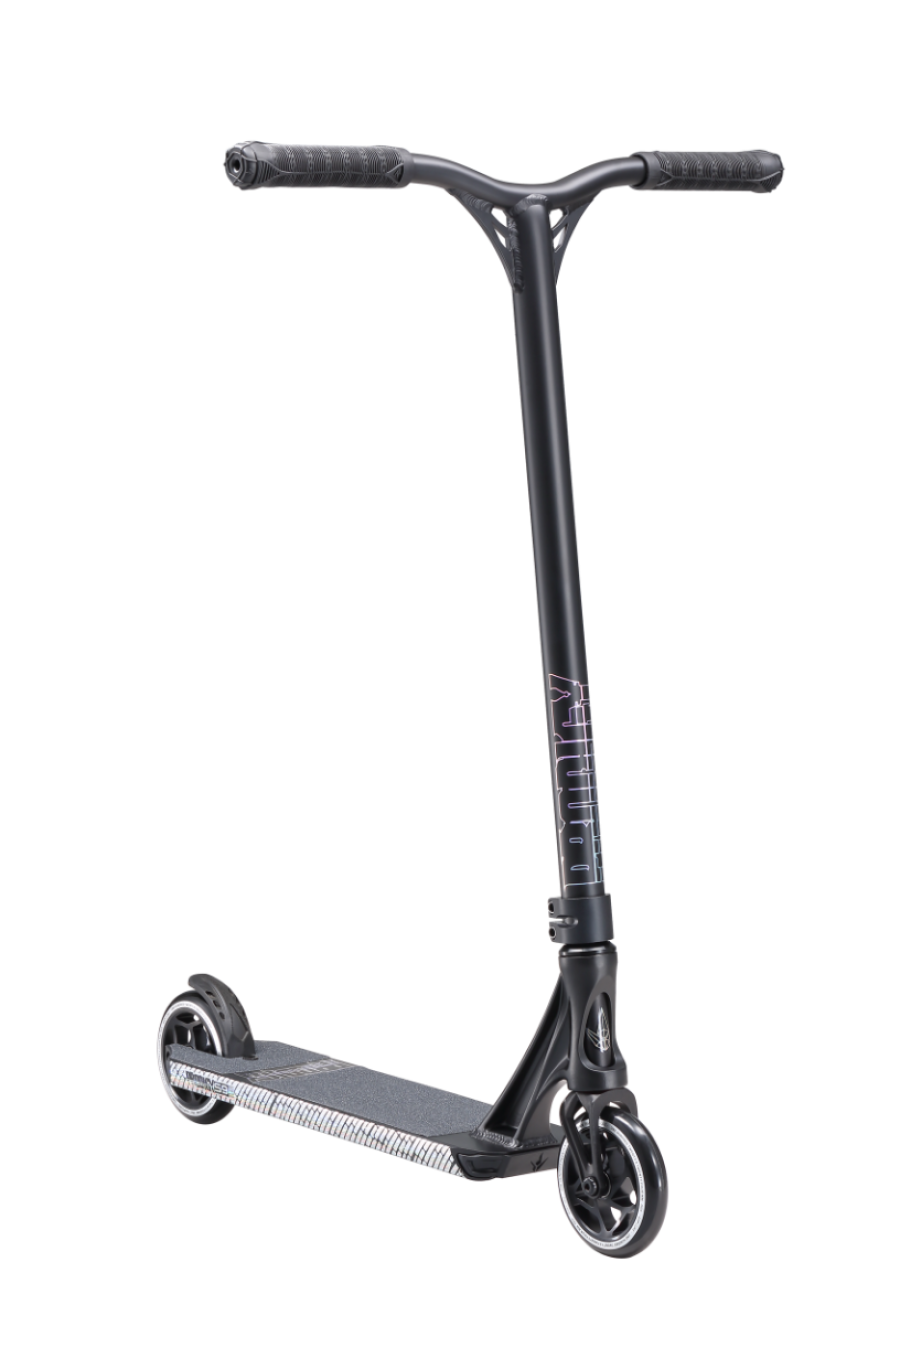 Envy Prodigy S9 Complete Scooter (Reflect)